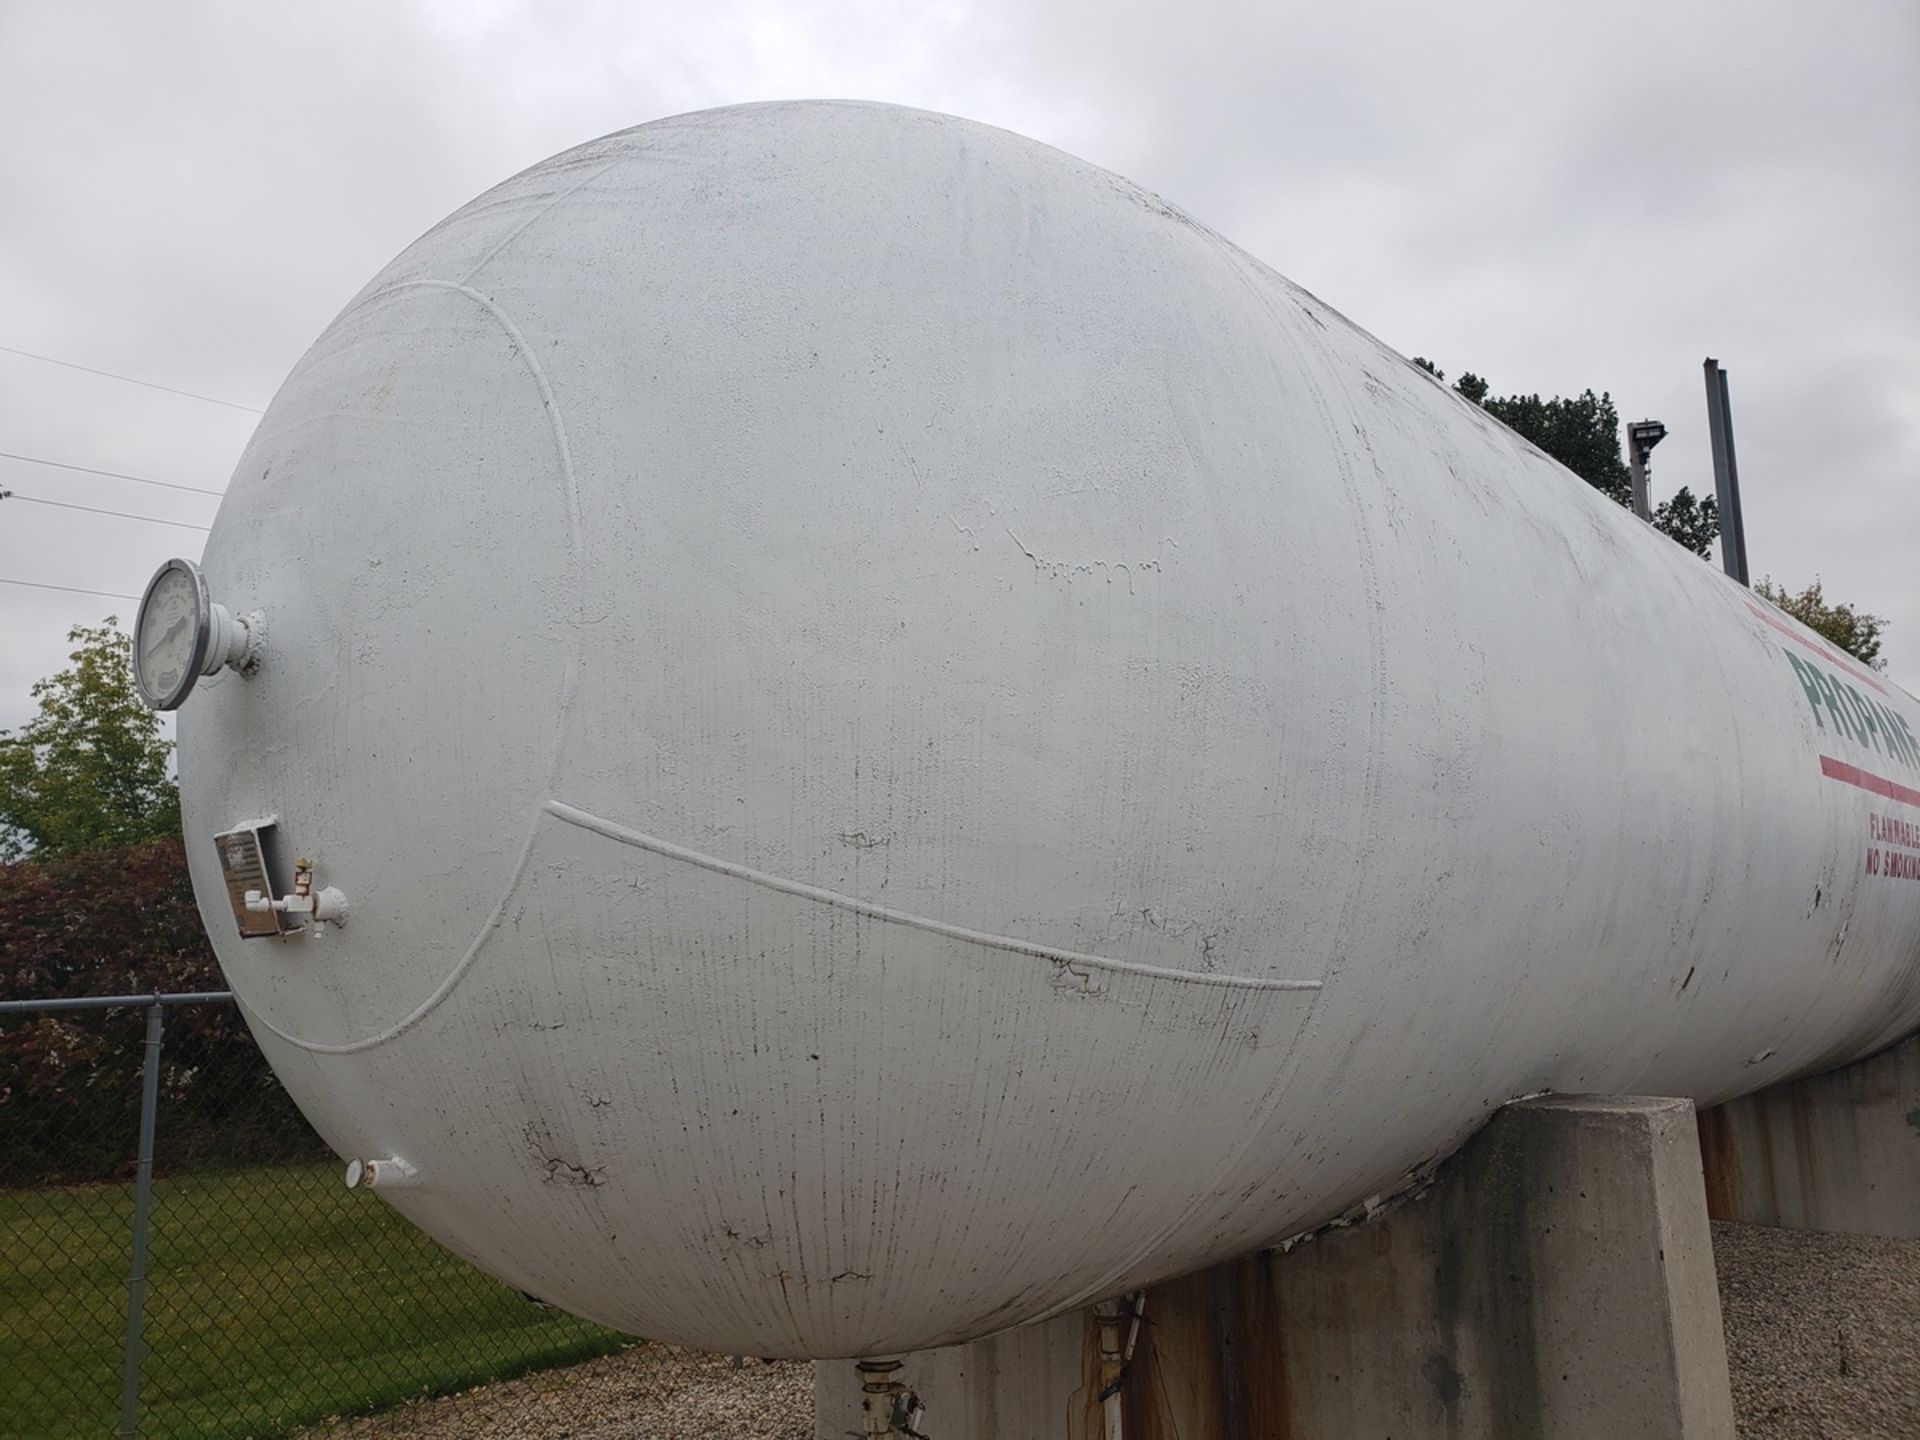 Riley Beaird Inc. Propane Storage Tank, 18,253 Gallons, S/N 106997-01-4 | Rig Fee Contact Rigger